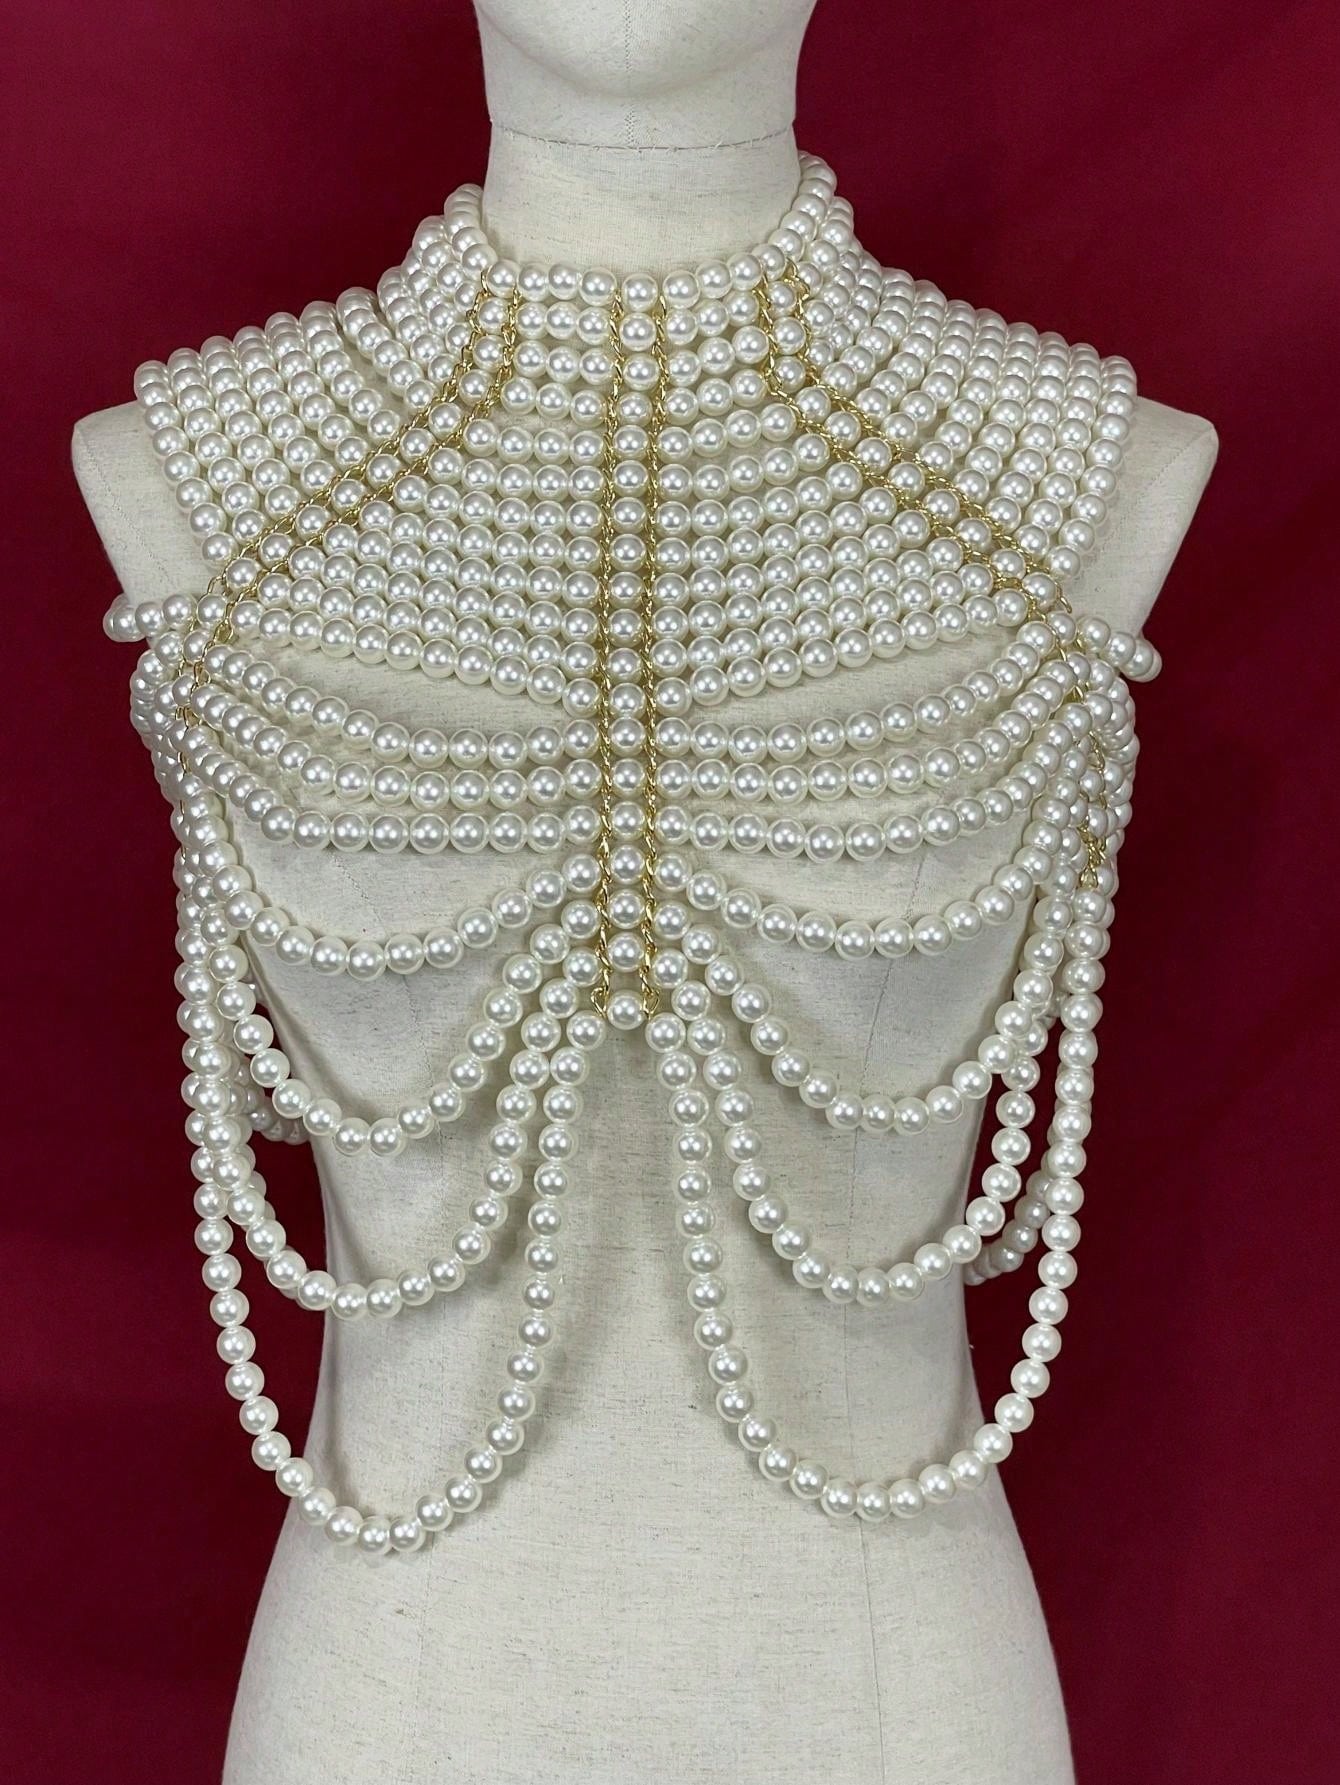 “Feel My Faux” 1 Pc Handmade Heavy Faux Pearl Body Chain Beaded Multi-Layered Medieval Style Beaded Necklace